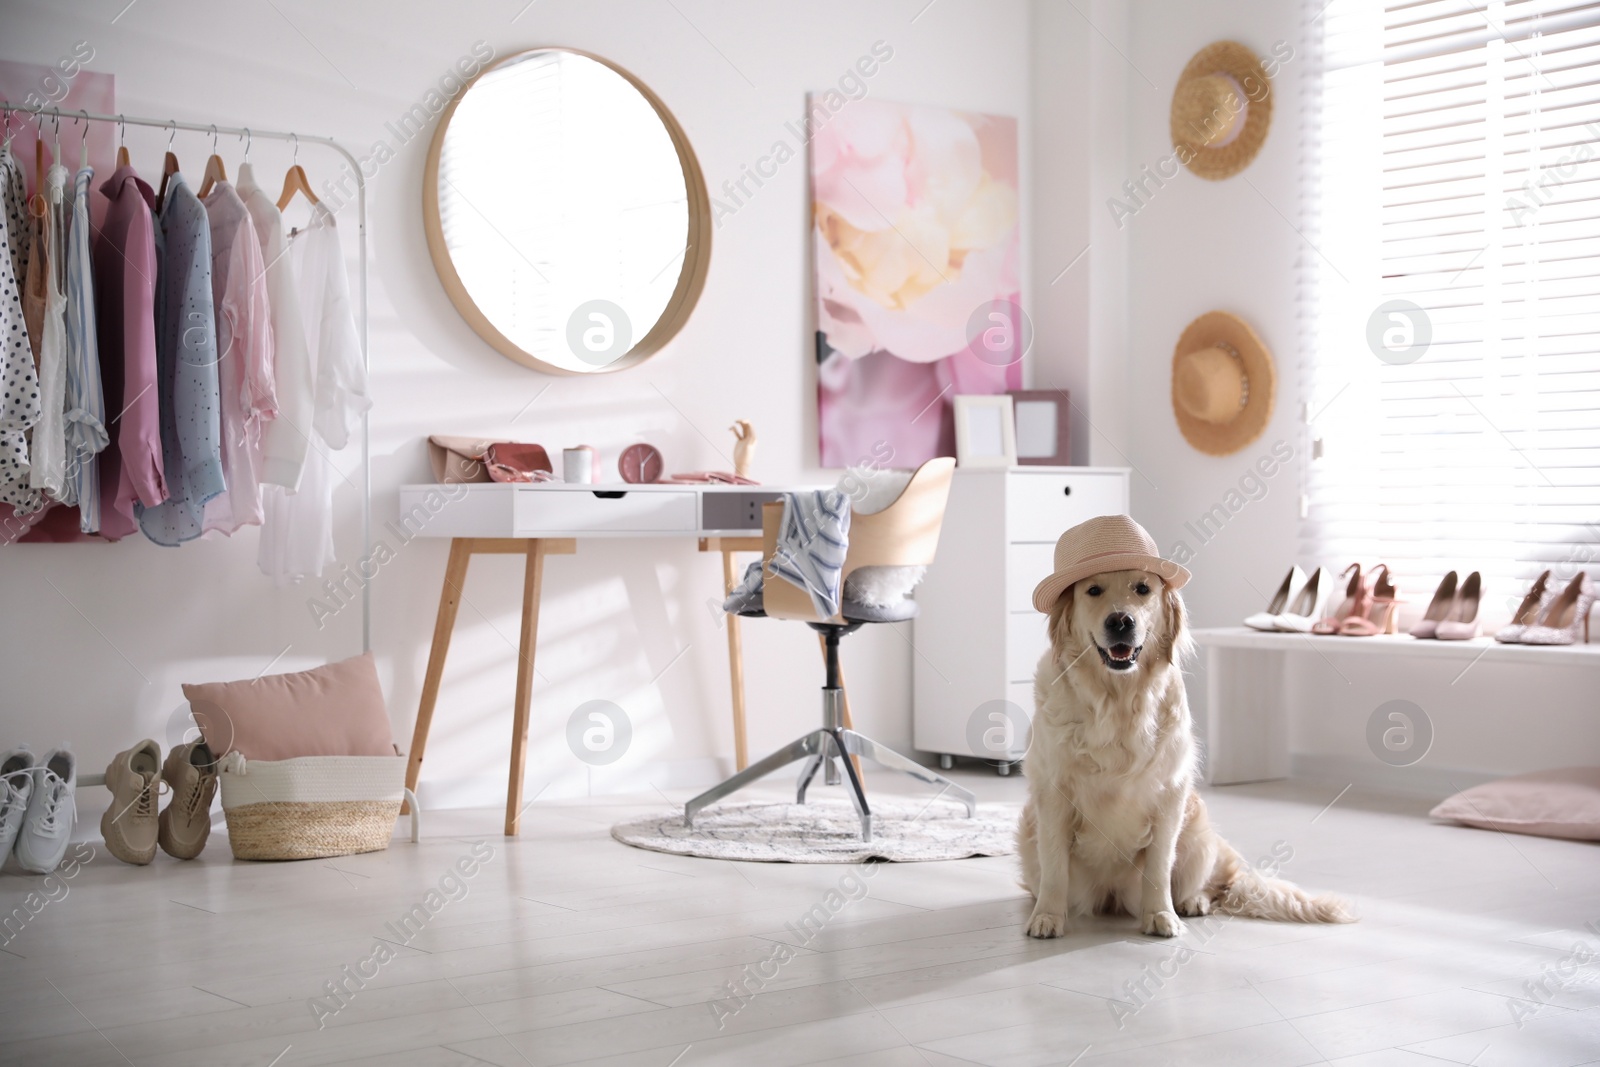 Photo of Adorable Golden Retriever dog in stylish dressing room